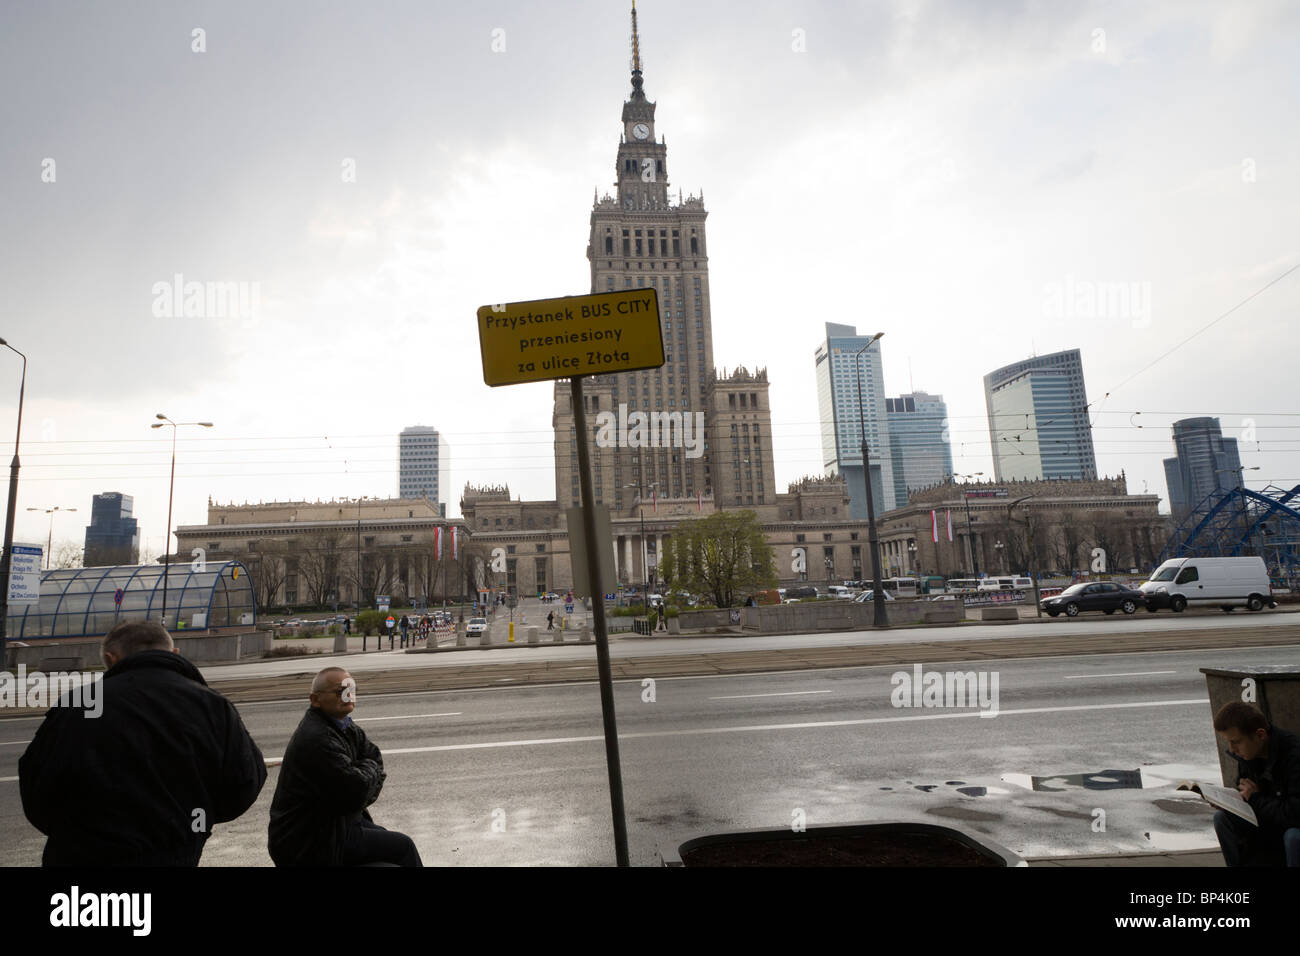 Palace of Culture and Science, seen from Marszalkowska street, Warsaw Poland. Stock Photo